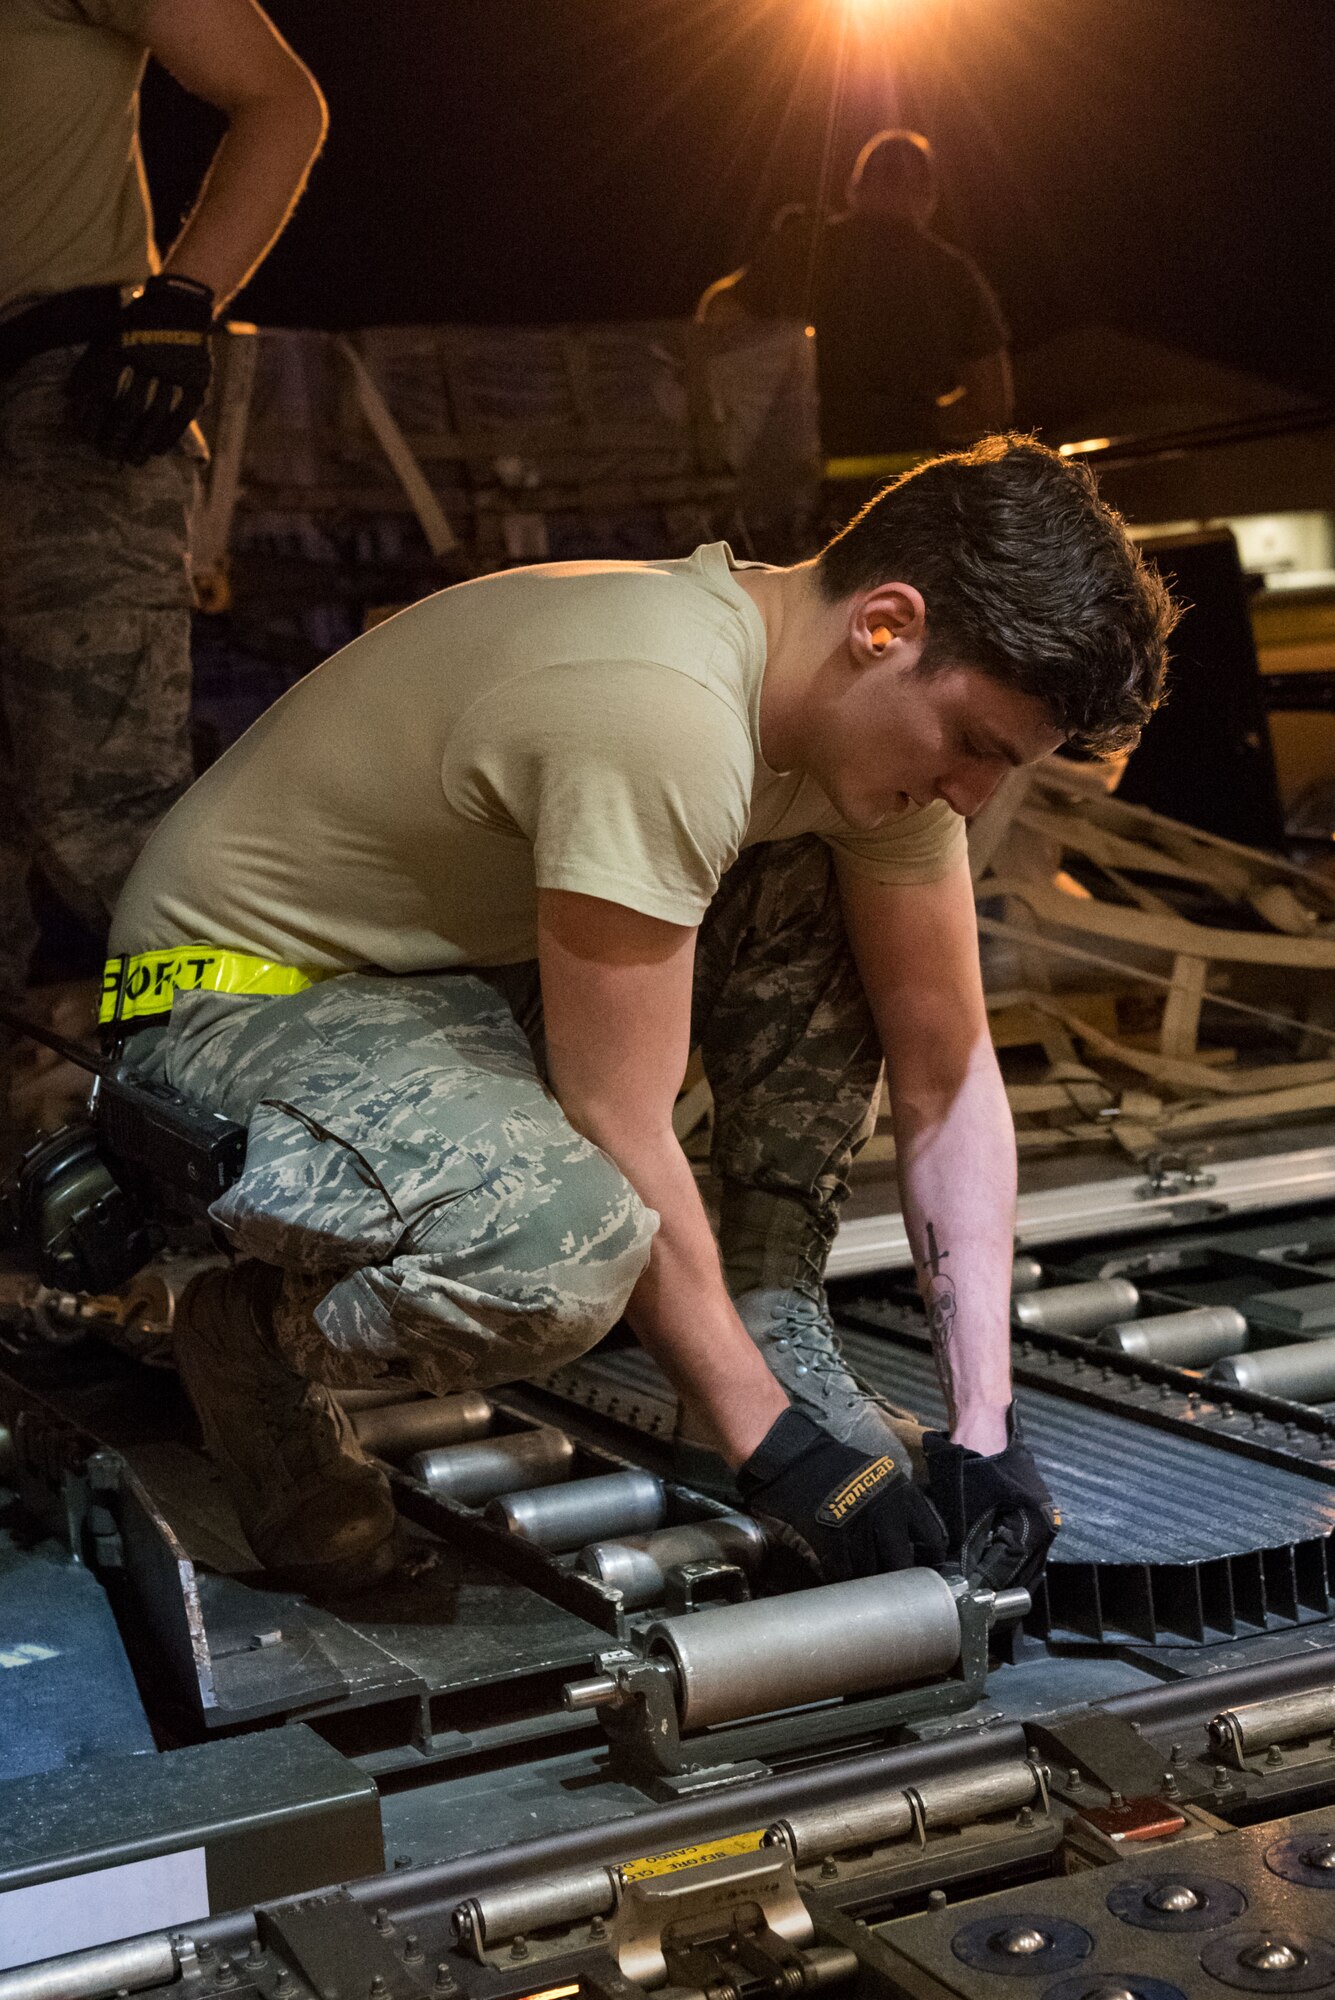 Senior Airman Brandon Sanderell, 436th Aerial Port Squadron ramp services specialist, configures a cargo roller Sept. 8, 2019, at Dover Air Force Base, Del. The Air Transport International Boeing 757-200 aircraft, part of the Civil Reserve Air Fleet program, was contracted to transport cargo and 30 Team Dover personnel to Fairchild AFB, Wash., participating in Mobility Guardian 2019. “In support of exercise Mobility Guardian 2019, Air Mobility Command contracted commercial aircraft to simulate activating CRAF marking the first time, in a long time, AMC has exercised a commercial component of its wartime plan,” said Maj. Adam Crane, AMC Headquarters CRAF Branch Chief, Scott AFB, Ill. (U.S. Air Force photo by Roland Balik)